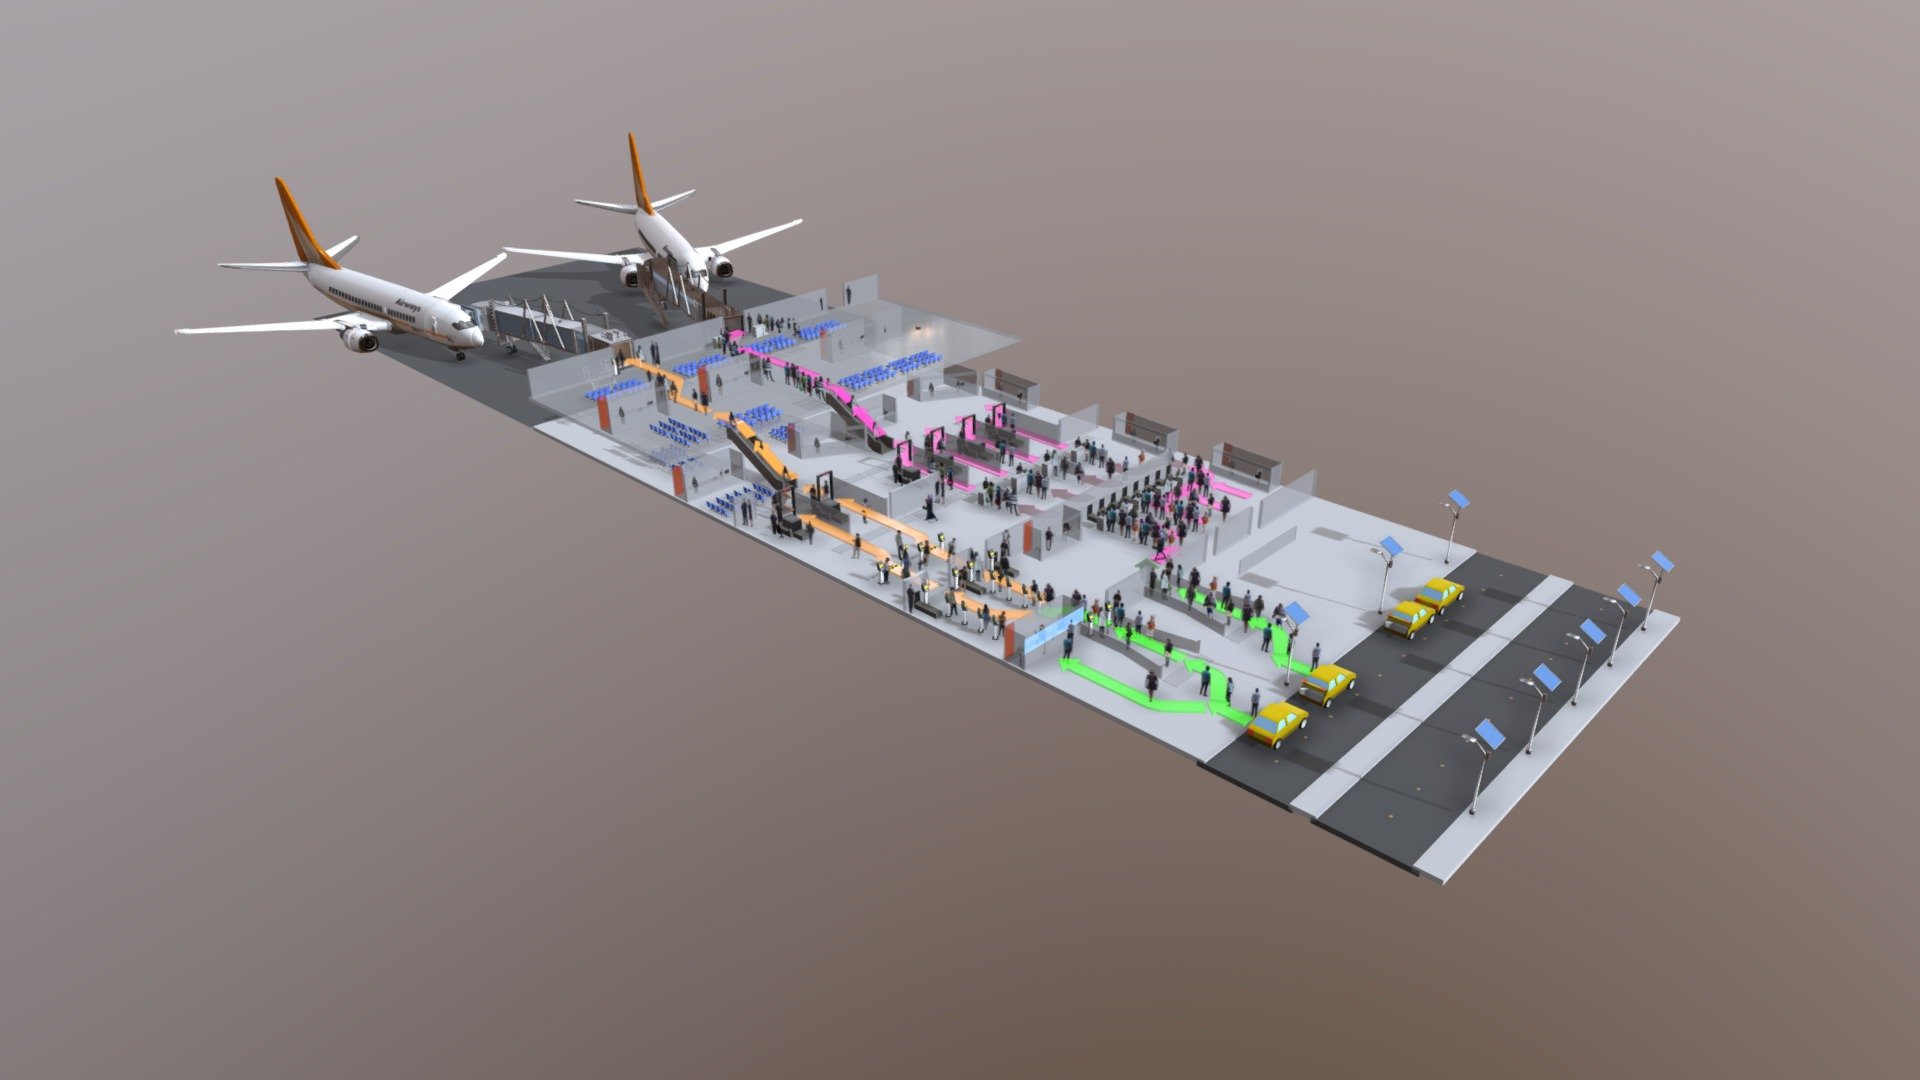 Quickly whipped this up for a presentation that can be seen here - https://chaitanyak.com/airport 





Assets from Blendswap:

Aiport  Jetway - https://www.blendswap.com/blends/view/77532 

Airliner - https://www.blendswap.com/blends/view/21368 



Other Assets: 

Human Cutouts - http://www.escalalatina.com/ - Airport Foot Traffic - Download Free 3D model by Chaitanya Krishnan (@chaitanyak) 3d model